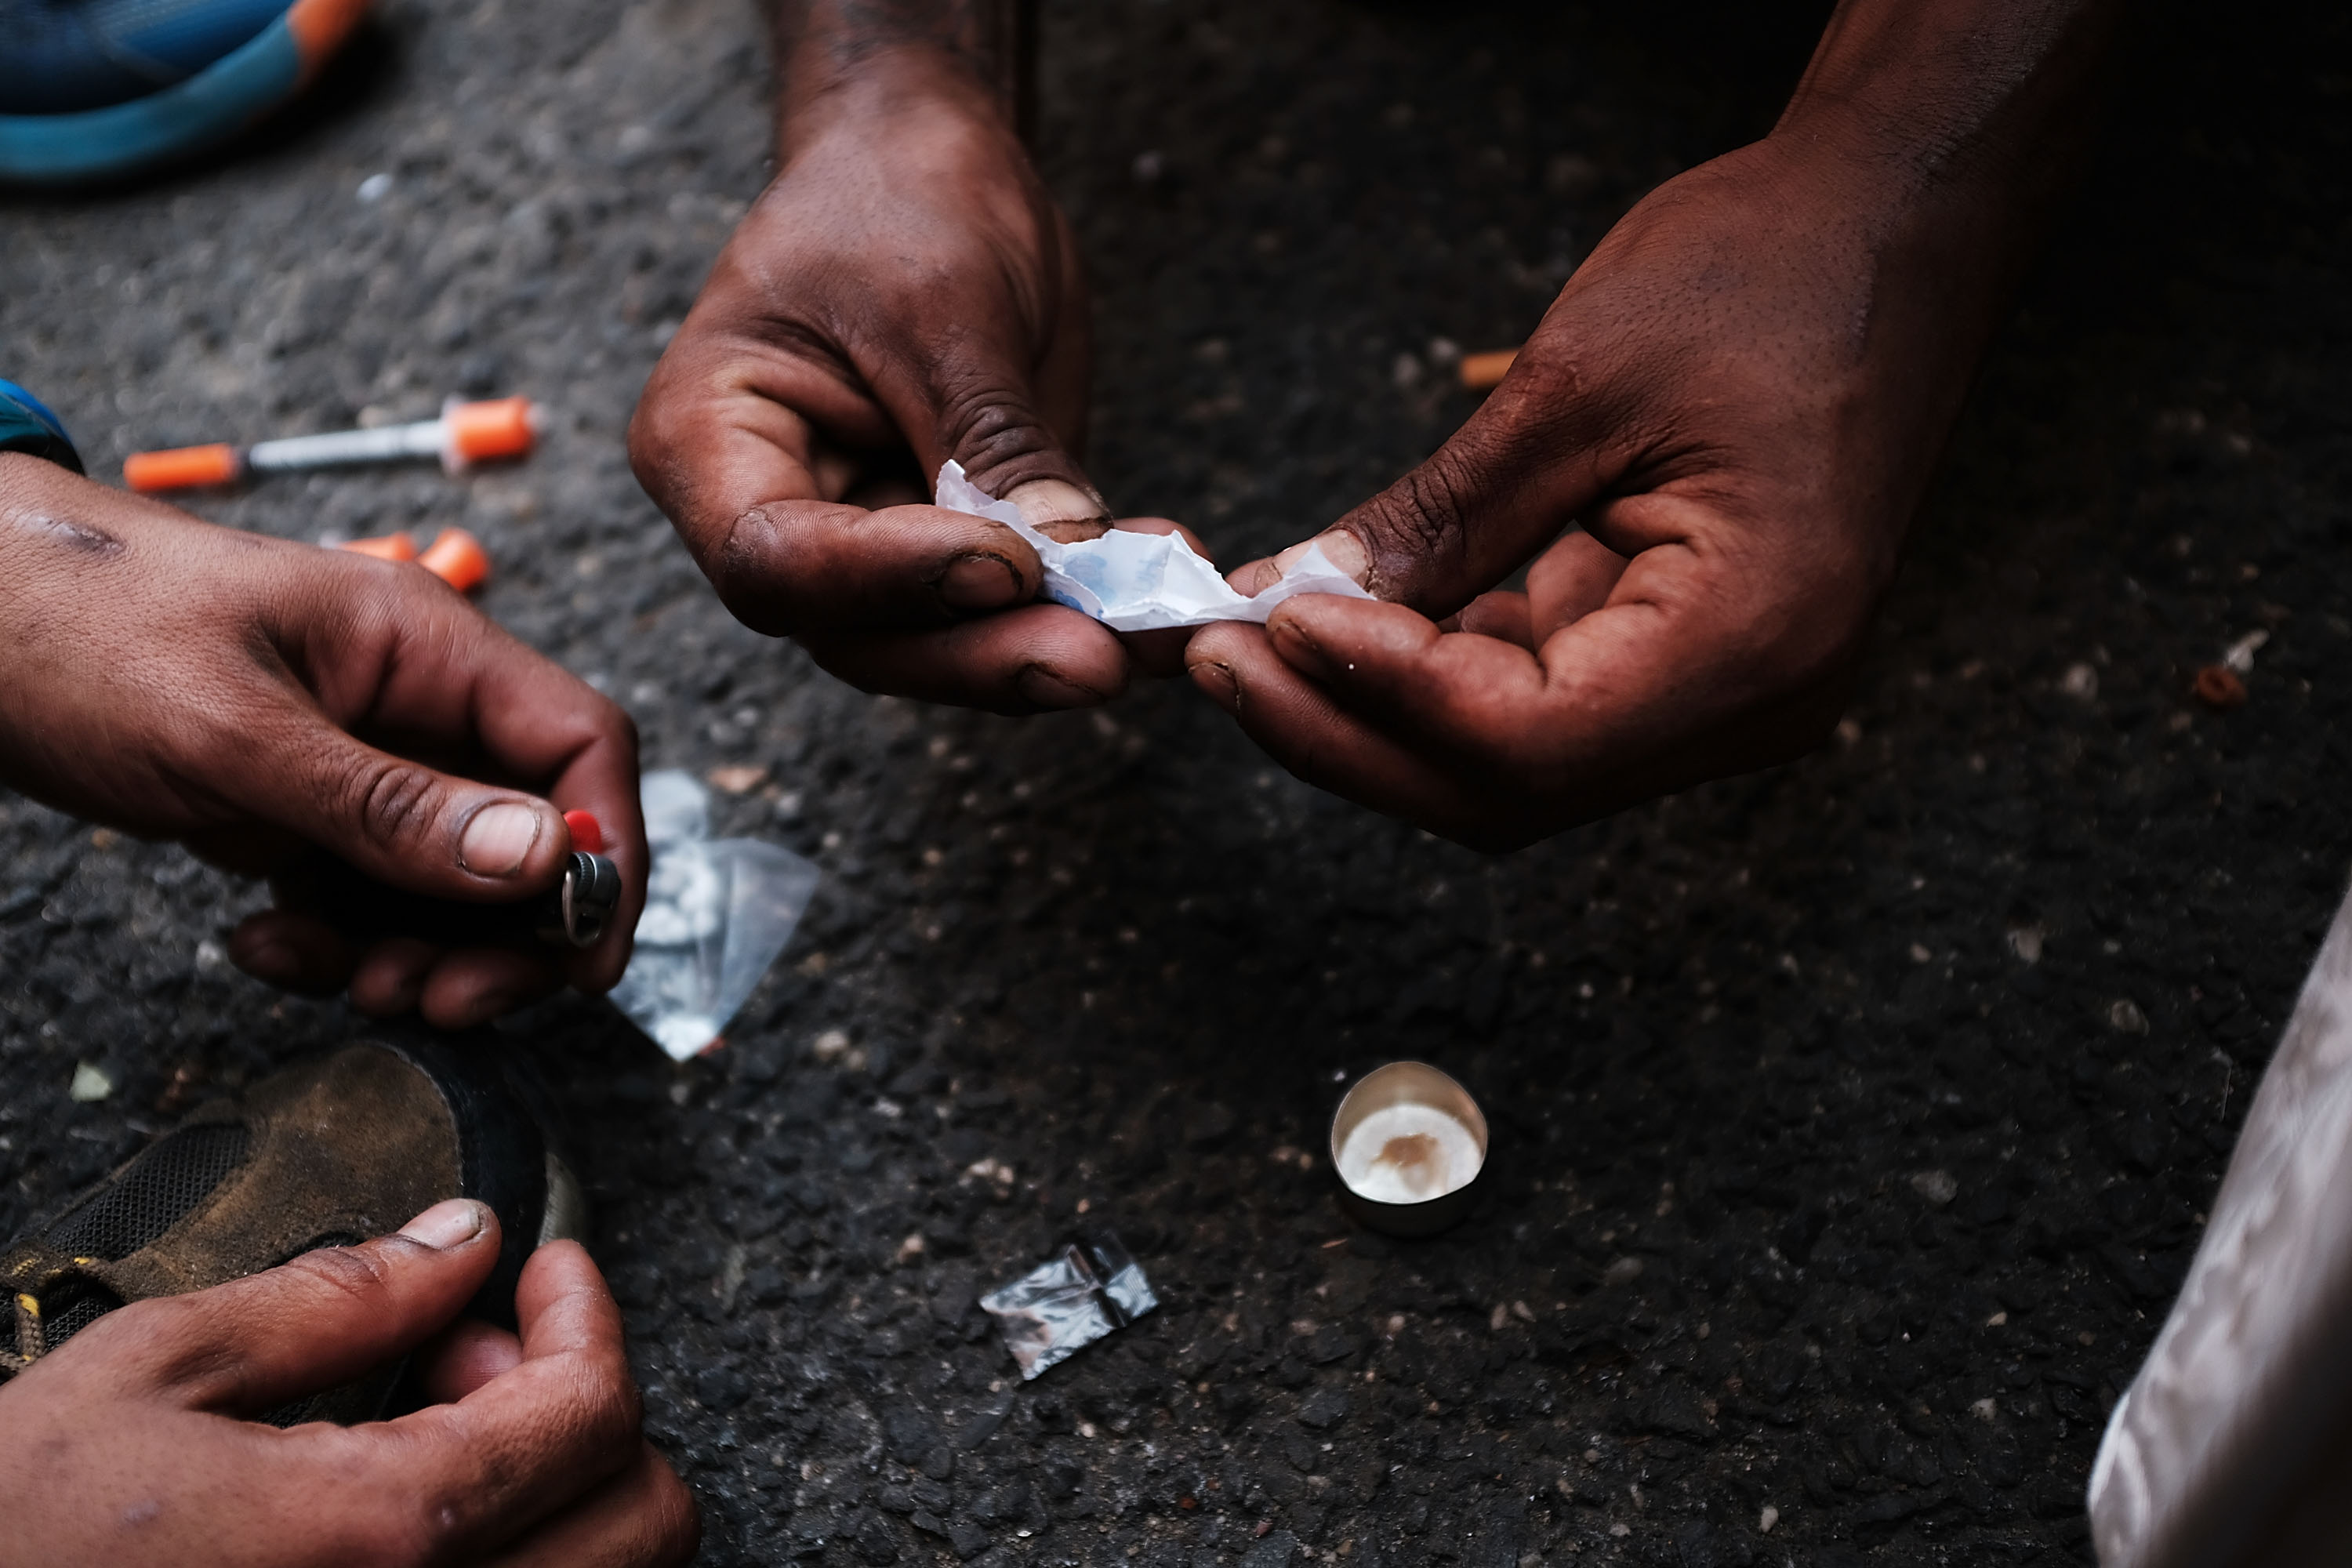 Heroin users prepare to shoot up on the street in a South Bronx neighborhood which has the highest rate of heroin-involved overdose deaths in the city (Spencer Platt/Getty Images)